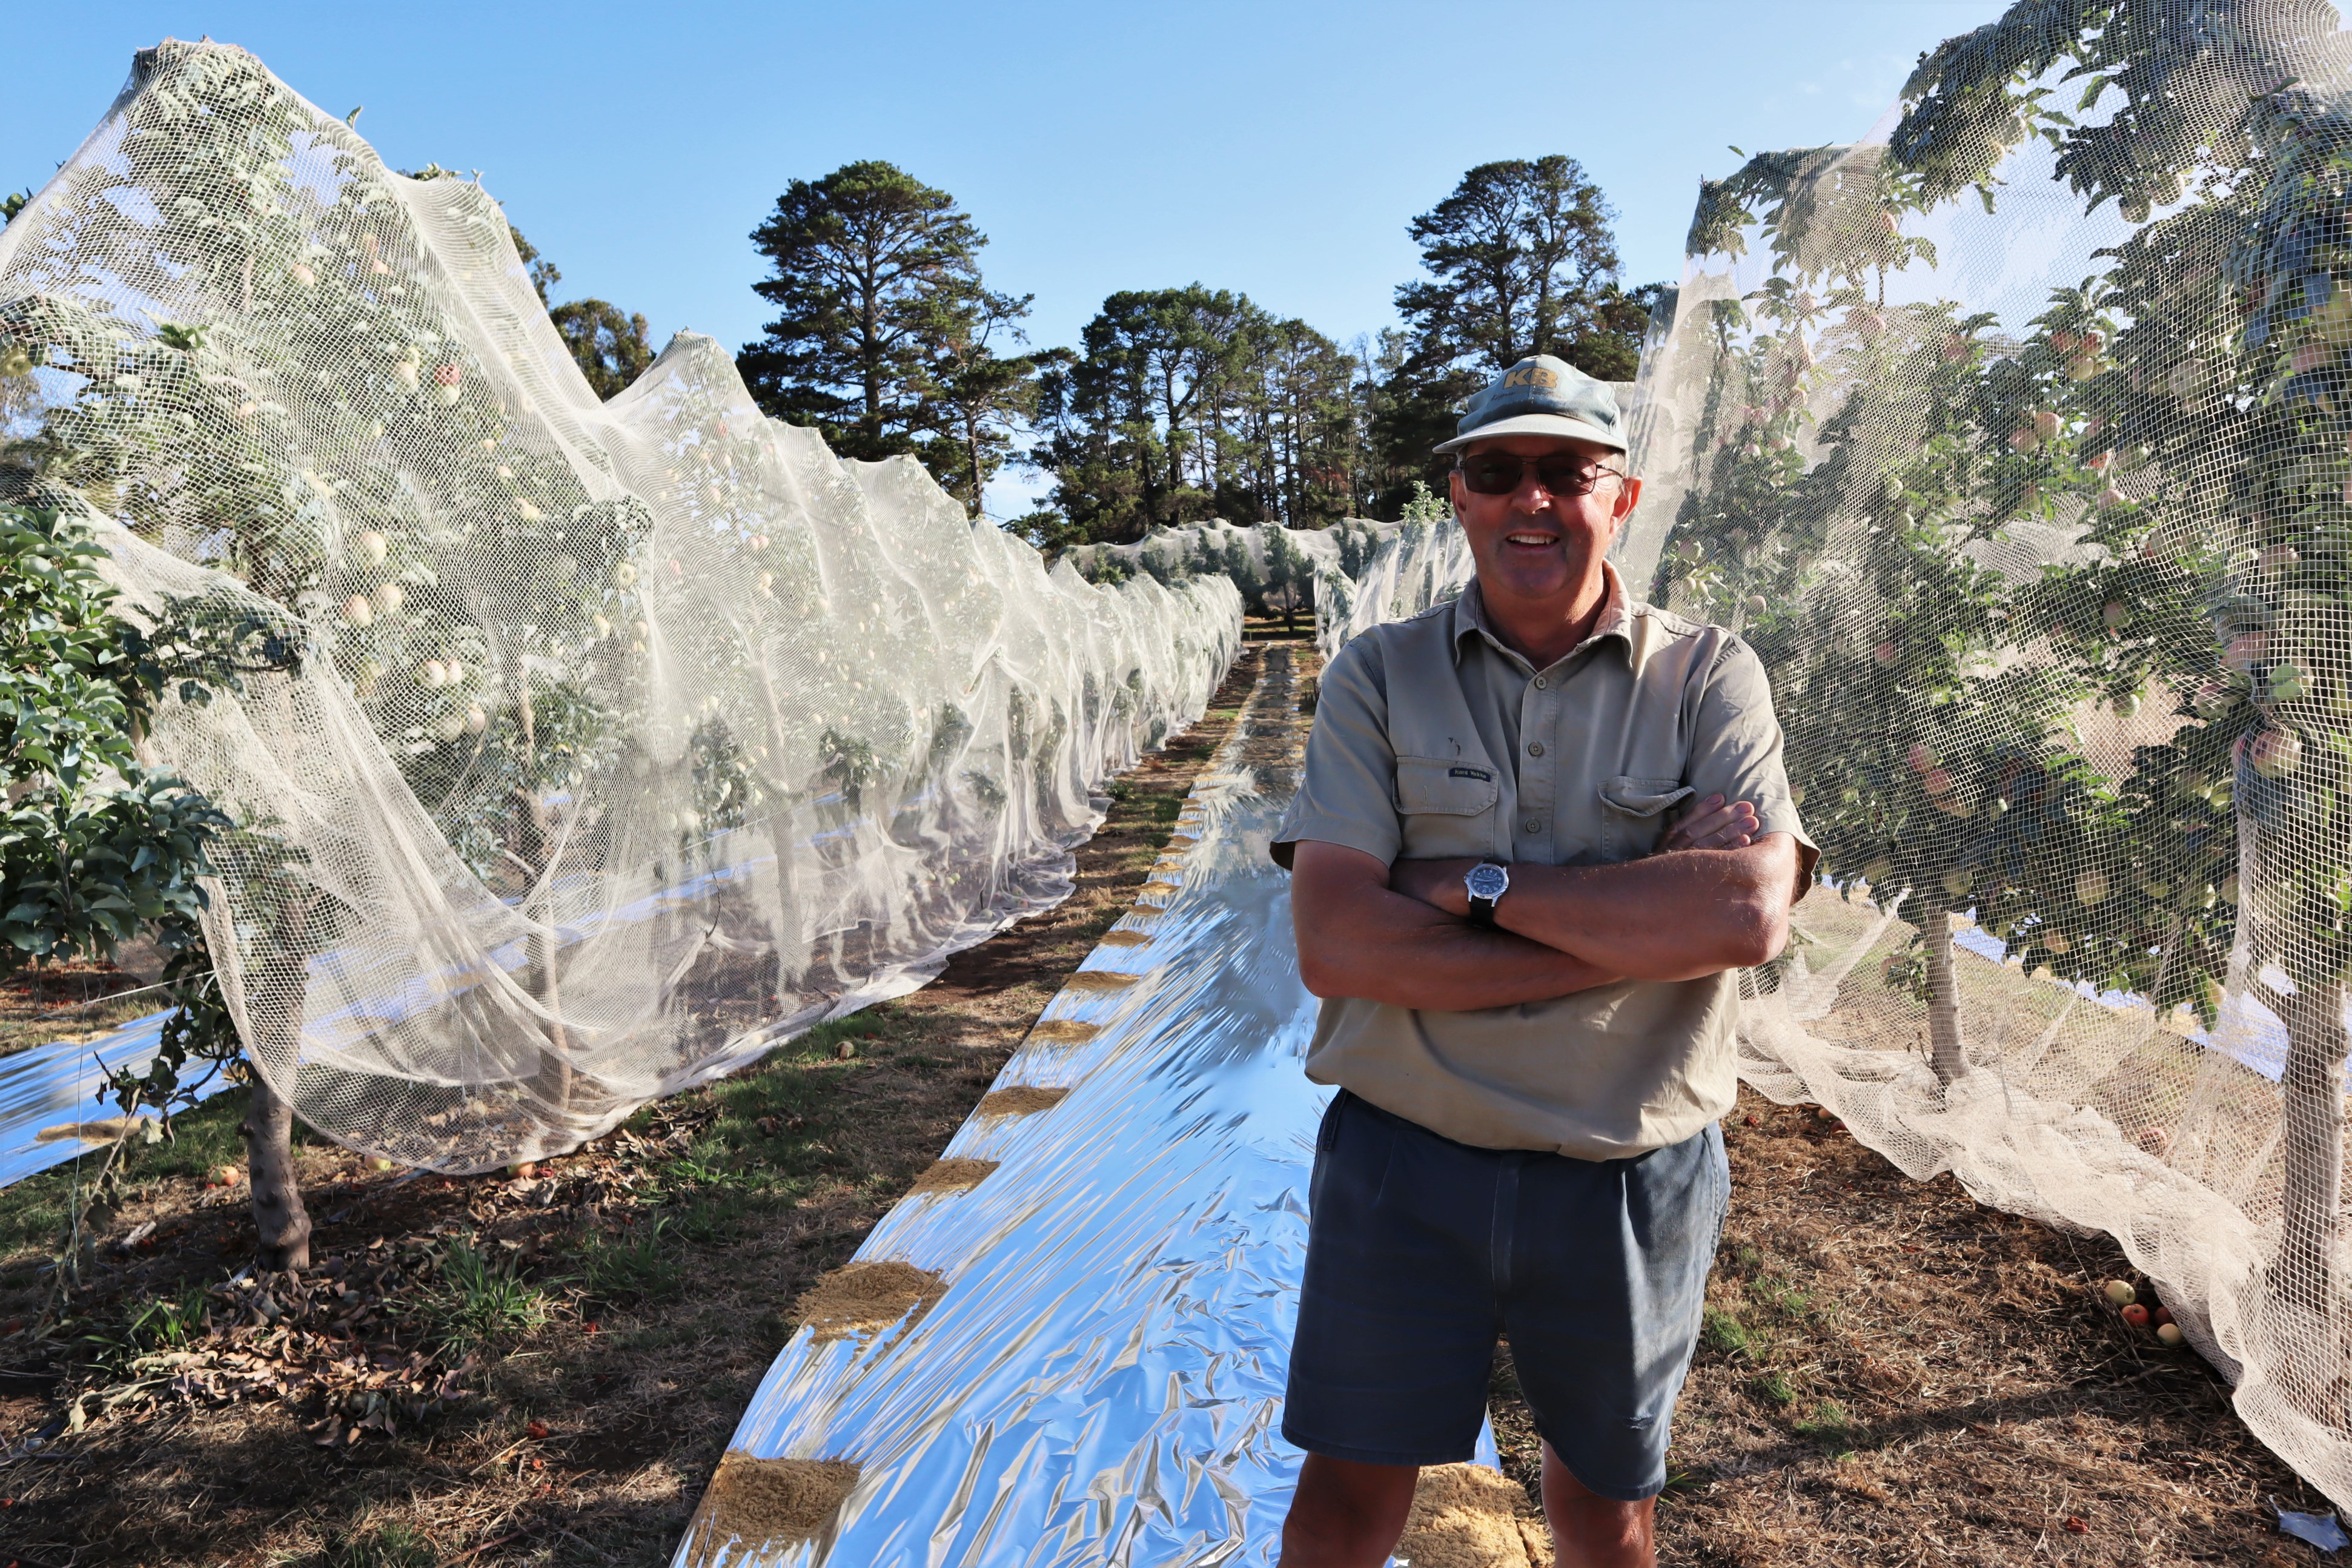 Man standing in front of reflective sheet in apple orchard.